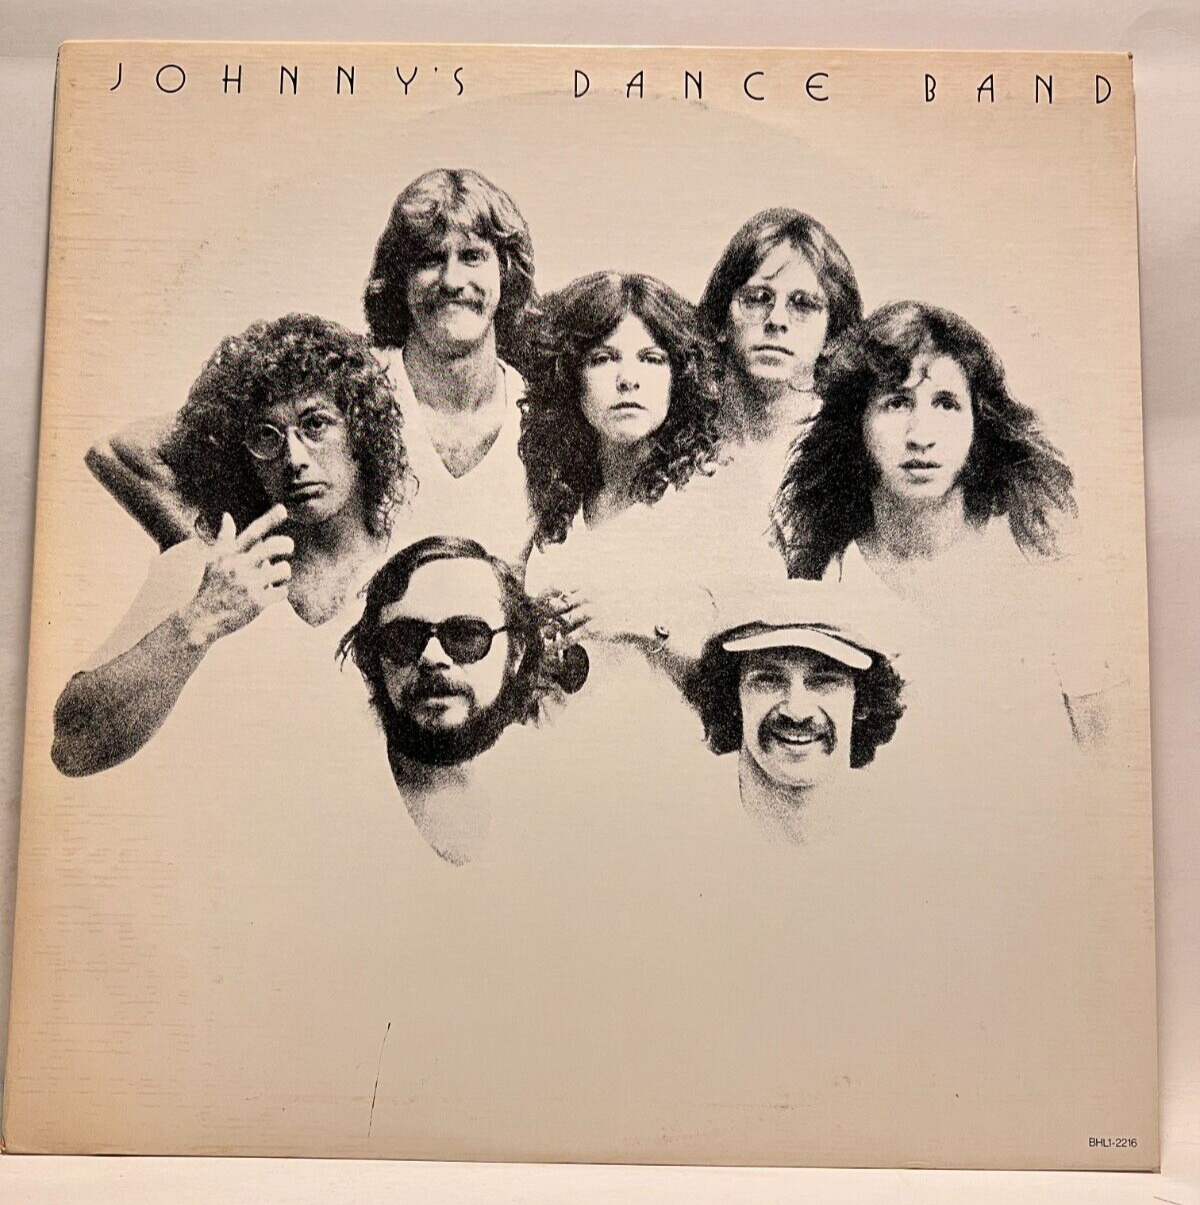 A63 Johnny's Dance Band, 1977 Windsong Records BHL1-2216 - Folk Rock - PROMO LP